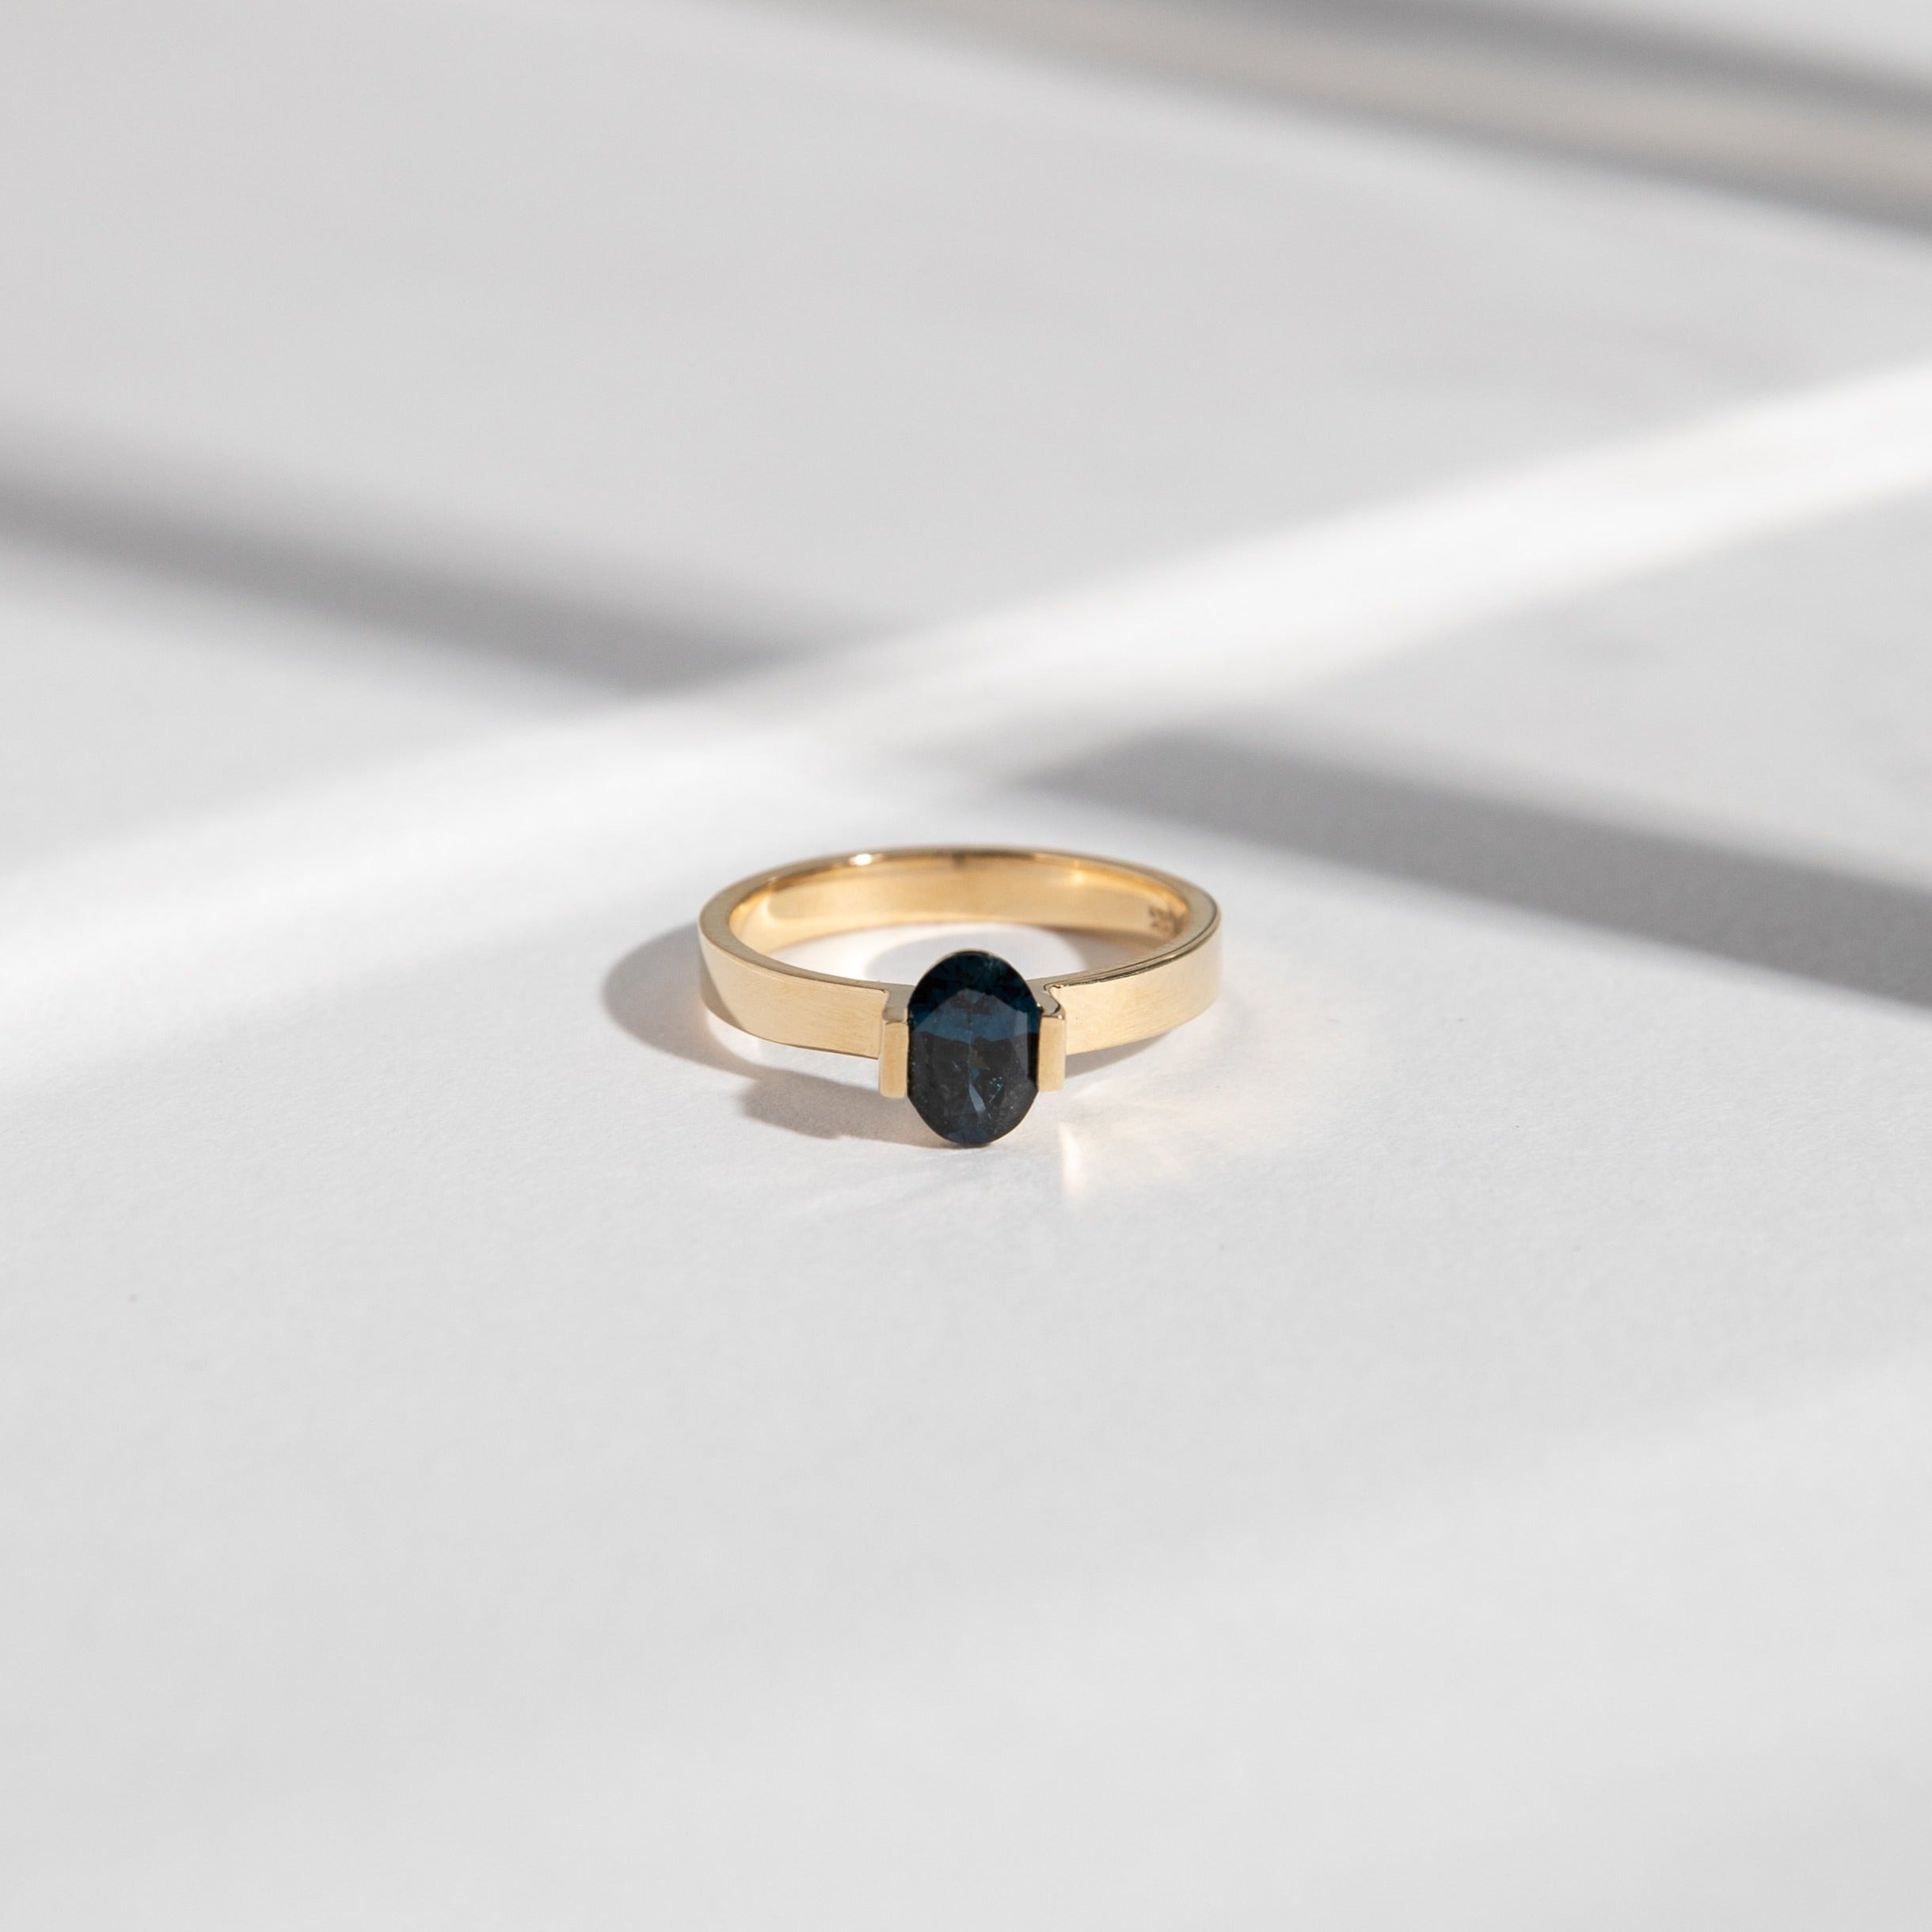 Silva Unique Ring in 14k Gold set with a 1ct  oval cut sapphire By SHW Fine Jewelry NYC